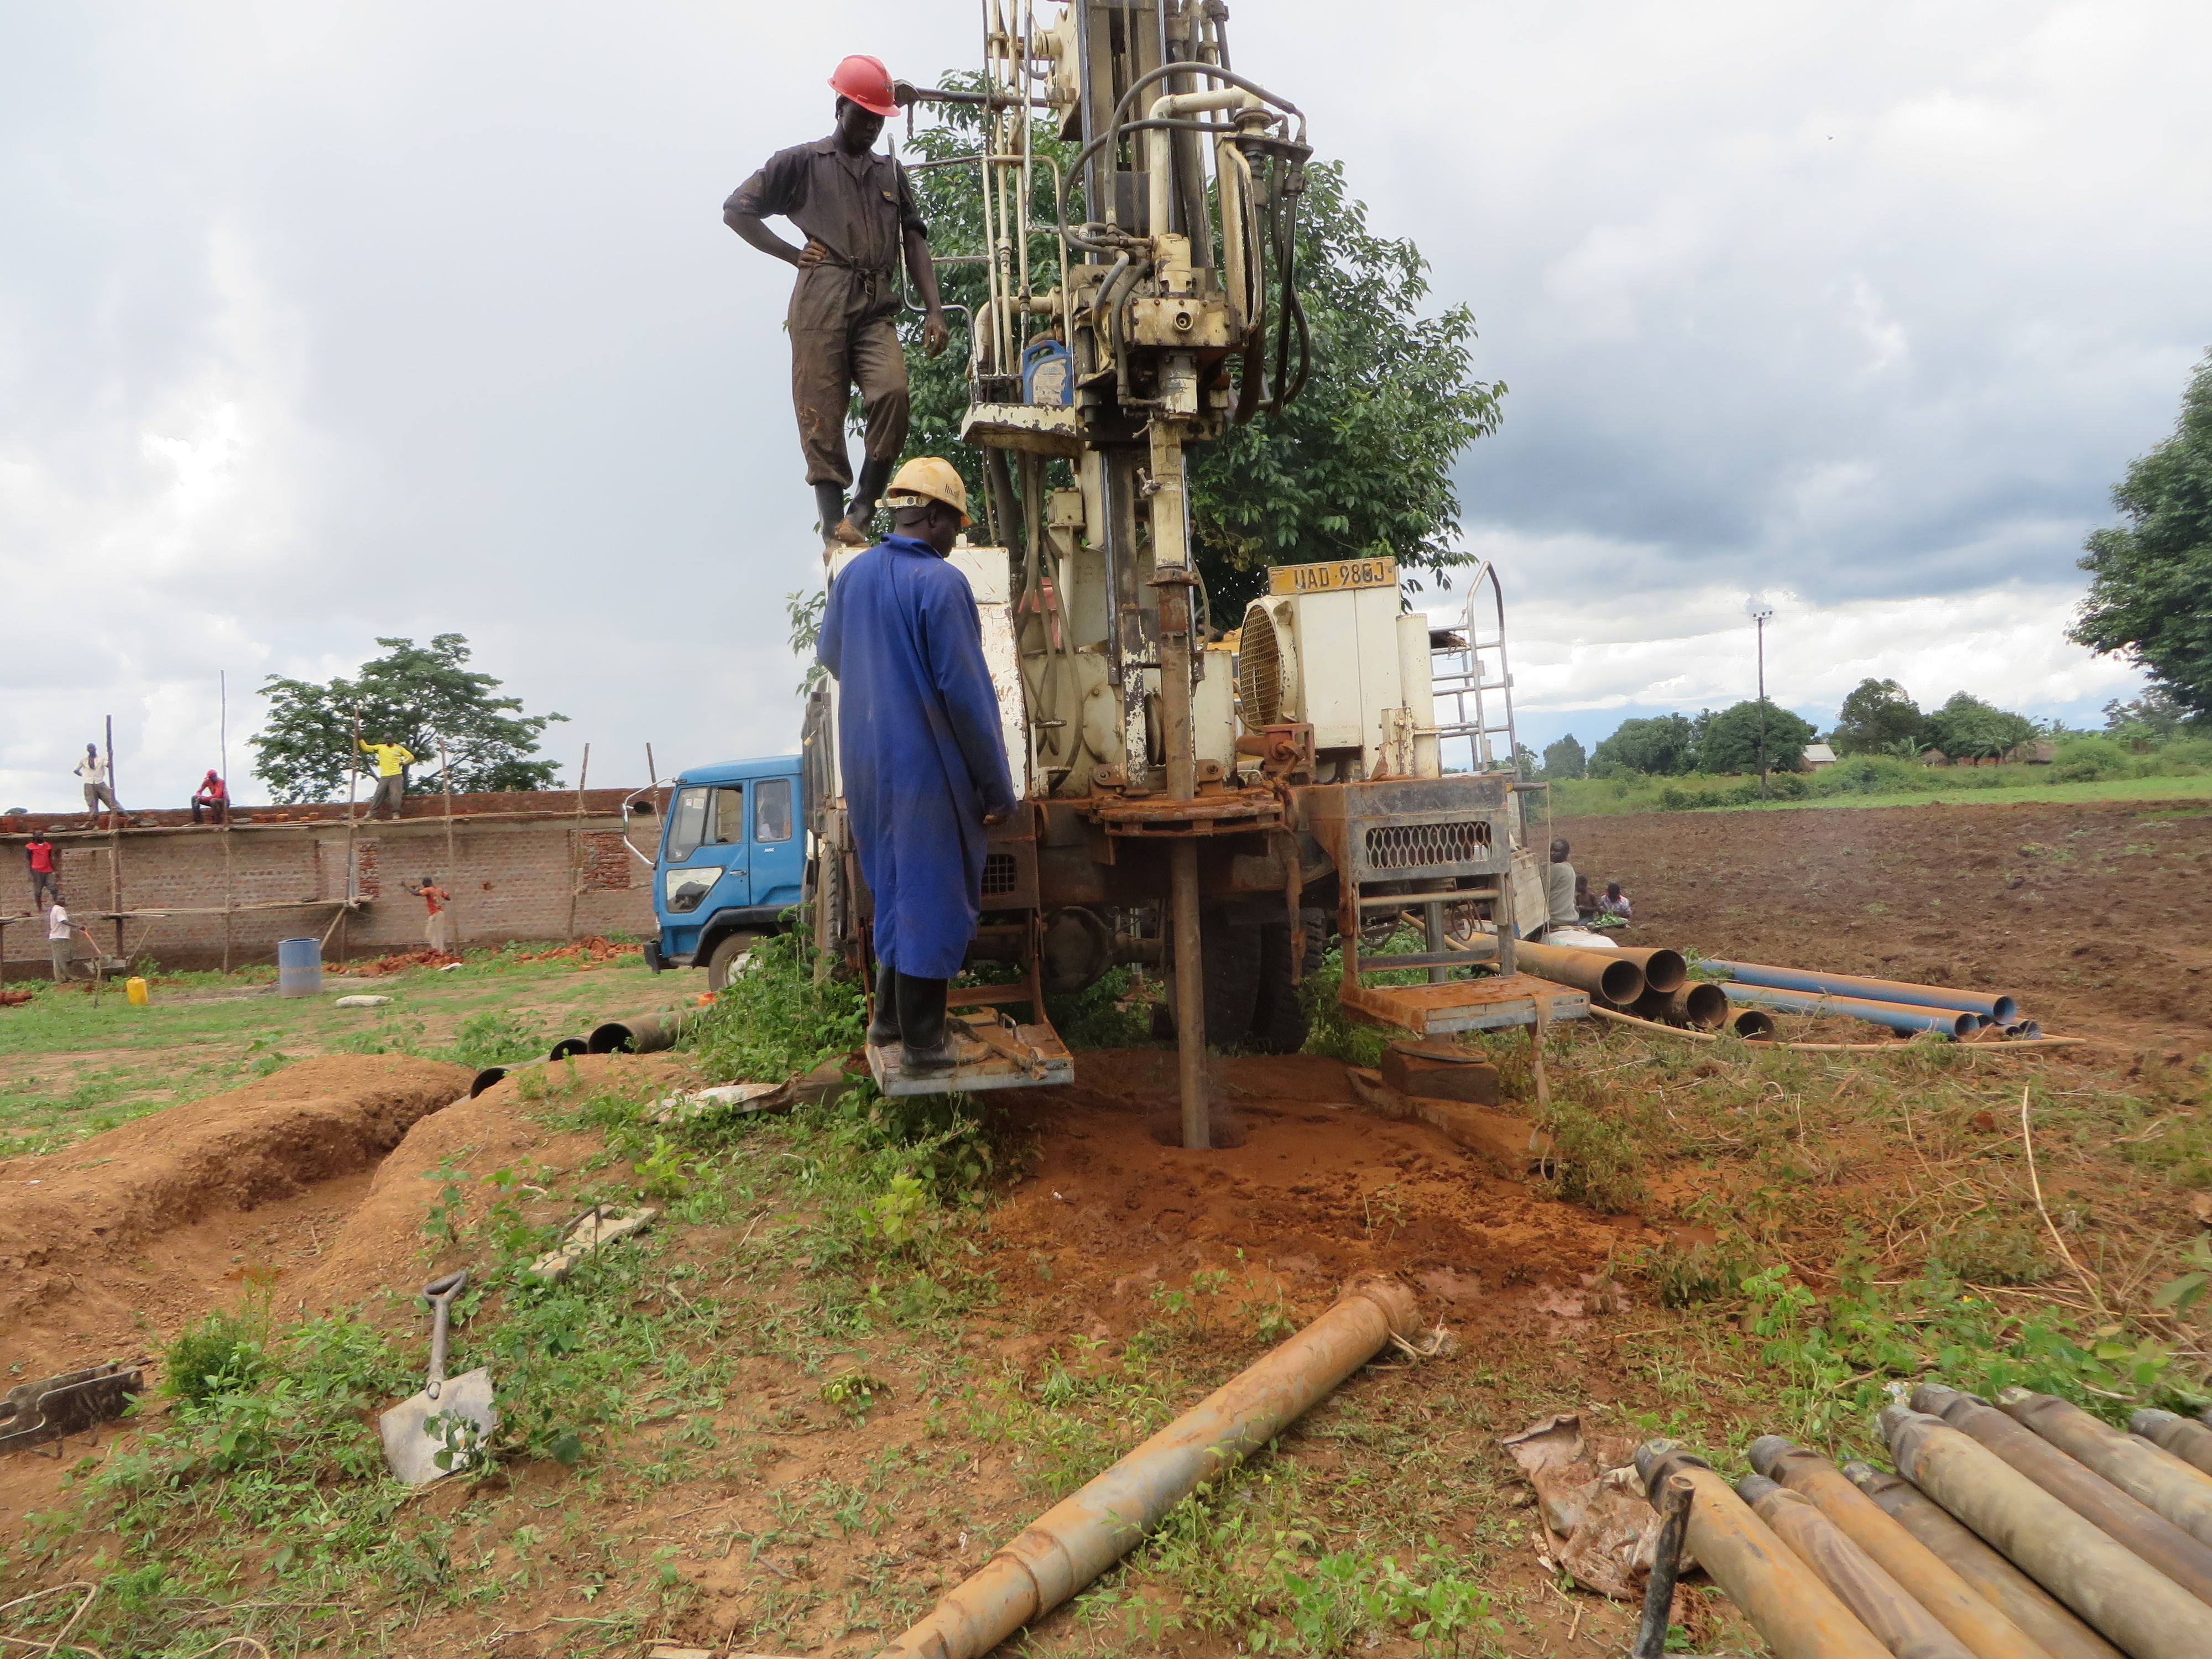 Drilling a borehole